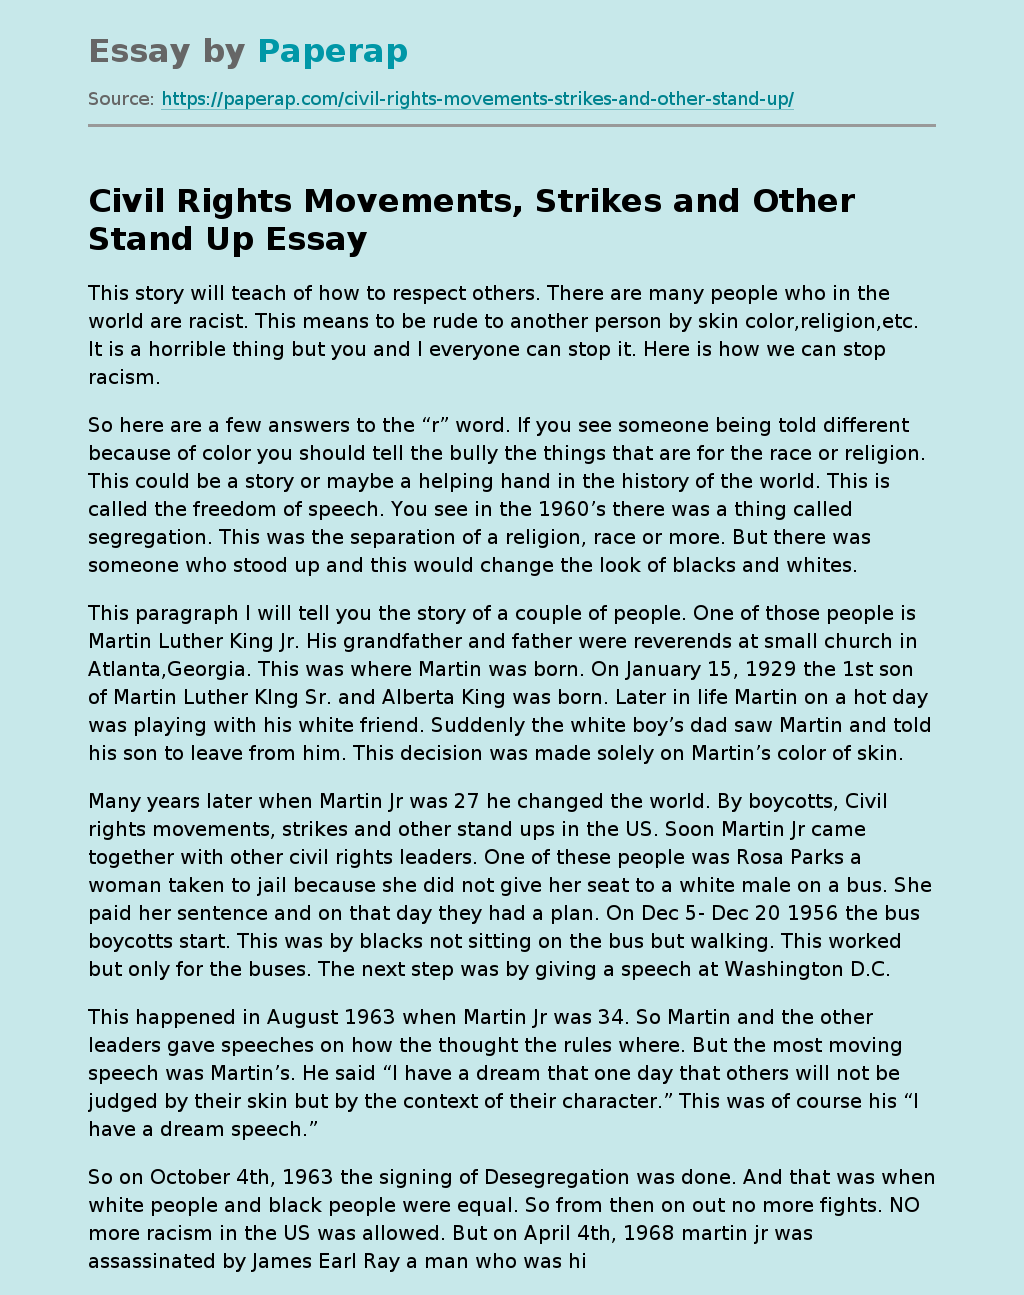 Civil Rights Movements, Strikes and Other Stand Up